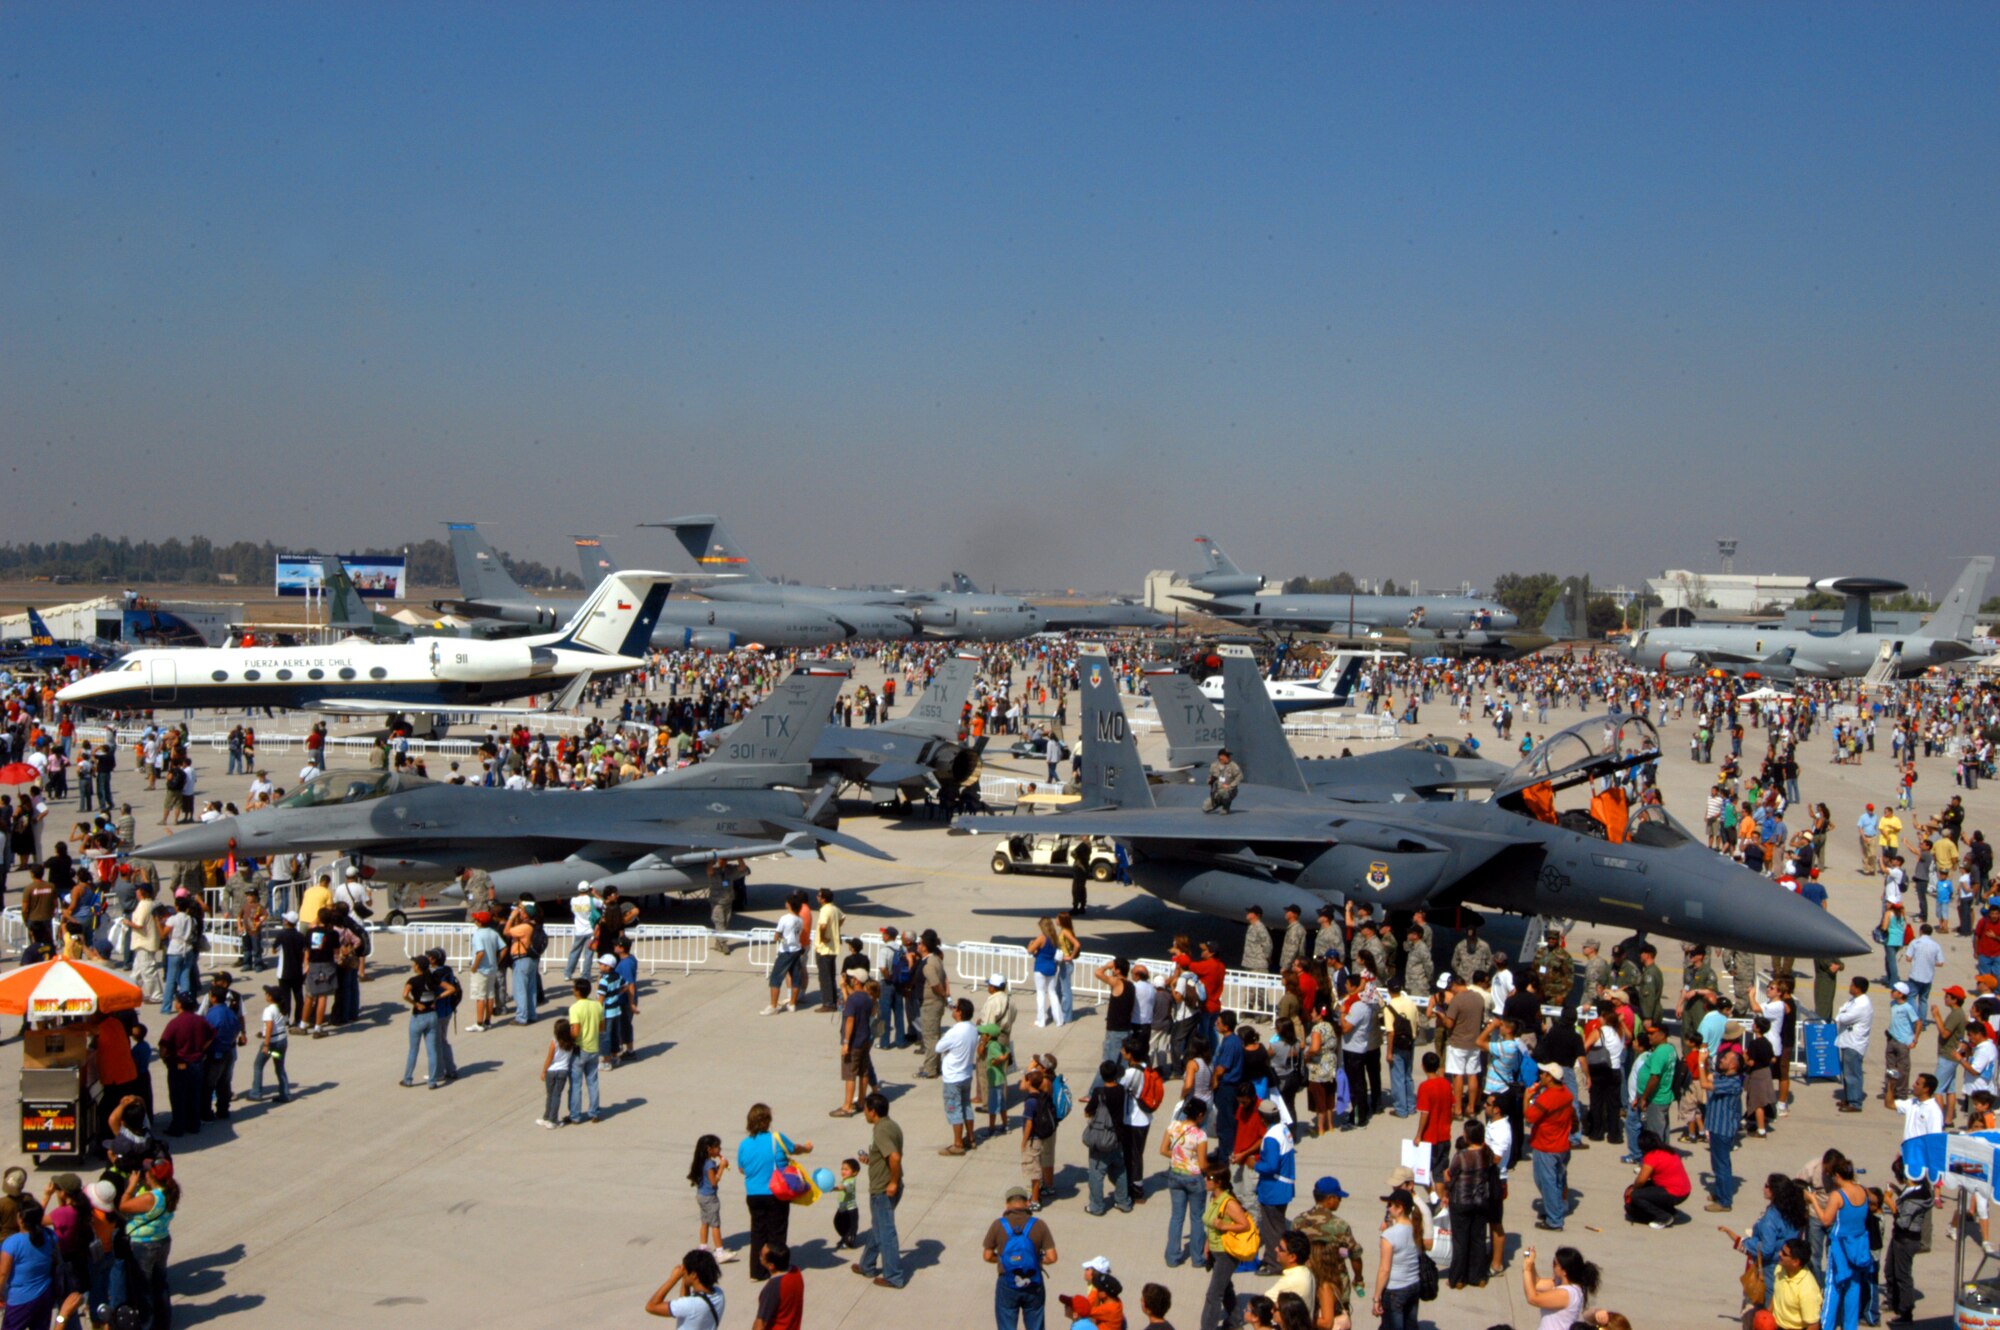 SANTIAGO, Chile -- U.S. Air Force aircraft get a close look by patrons of FIDAE 2008, one of the largest air shows in South America April 5. A host of other Airmen and aircraft were part of the air show and Exercise Newen 2008.  The exercise emphasizes cooperation and partnerships between the U.S. and Chilean militaries. Fighters and tankers flew in the exercise along side Chilean counterparts.  (U.S. Air Force photo/Master Sgt. Jason Tudor)